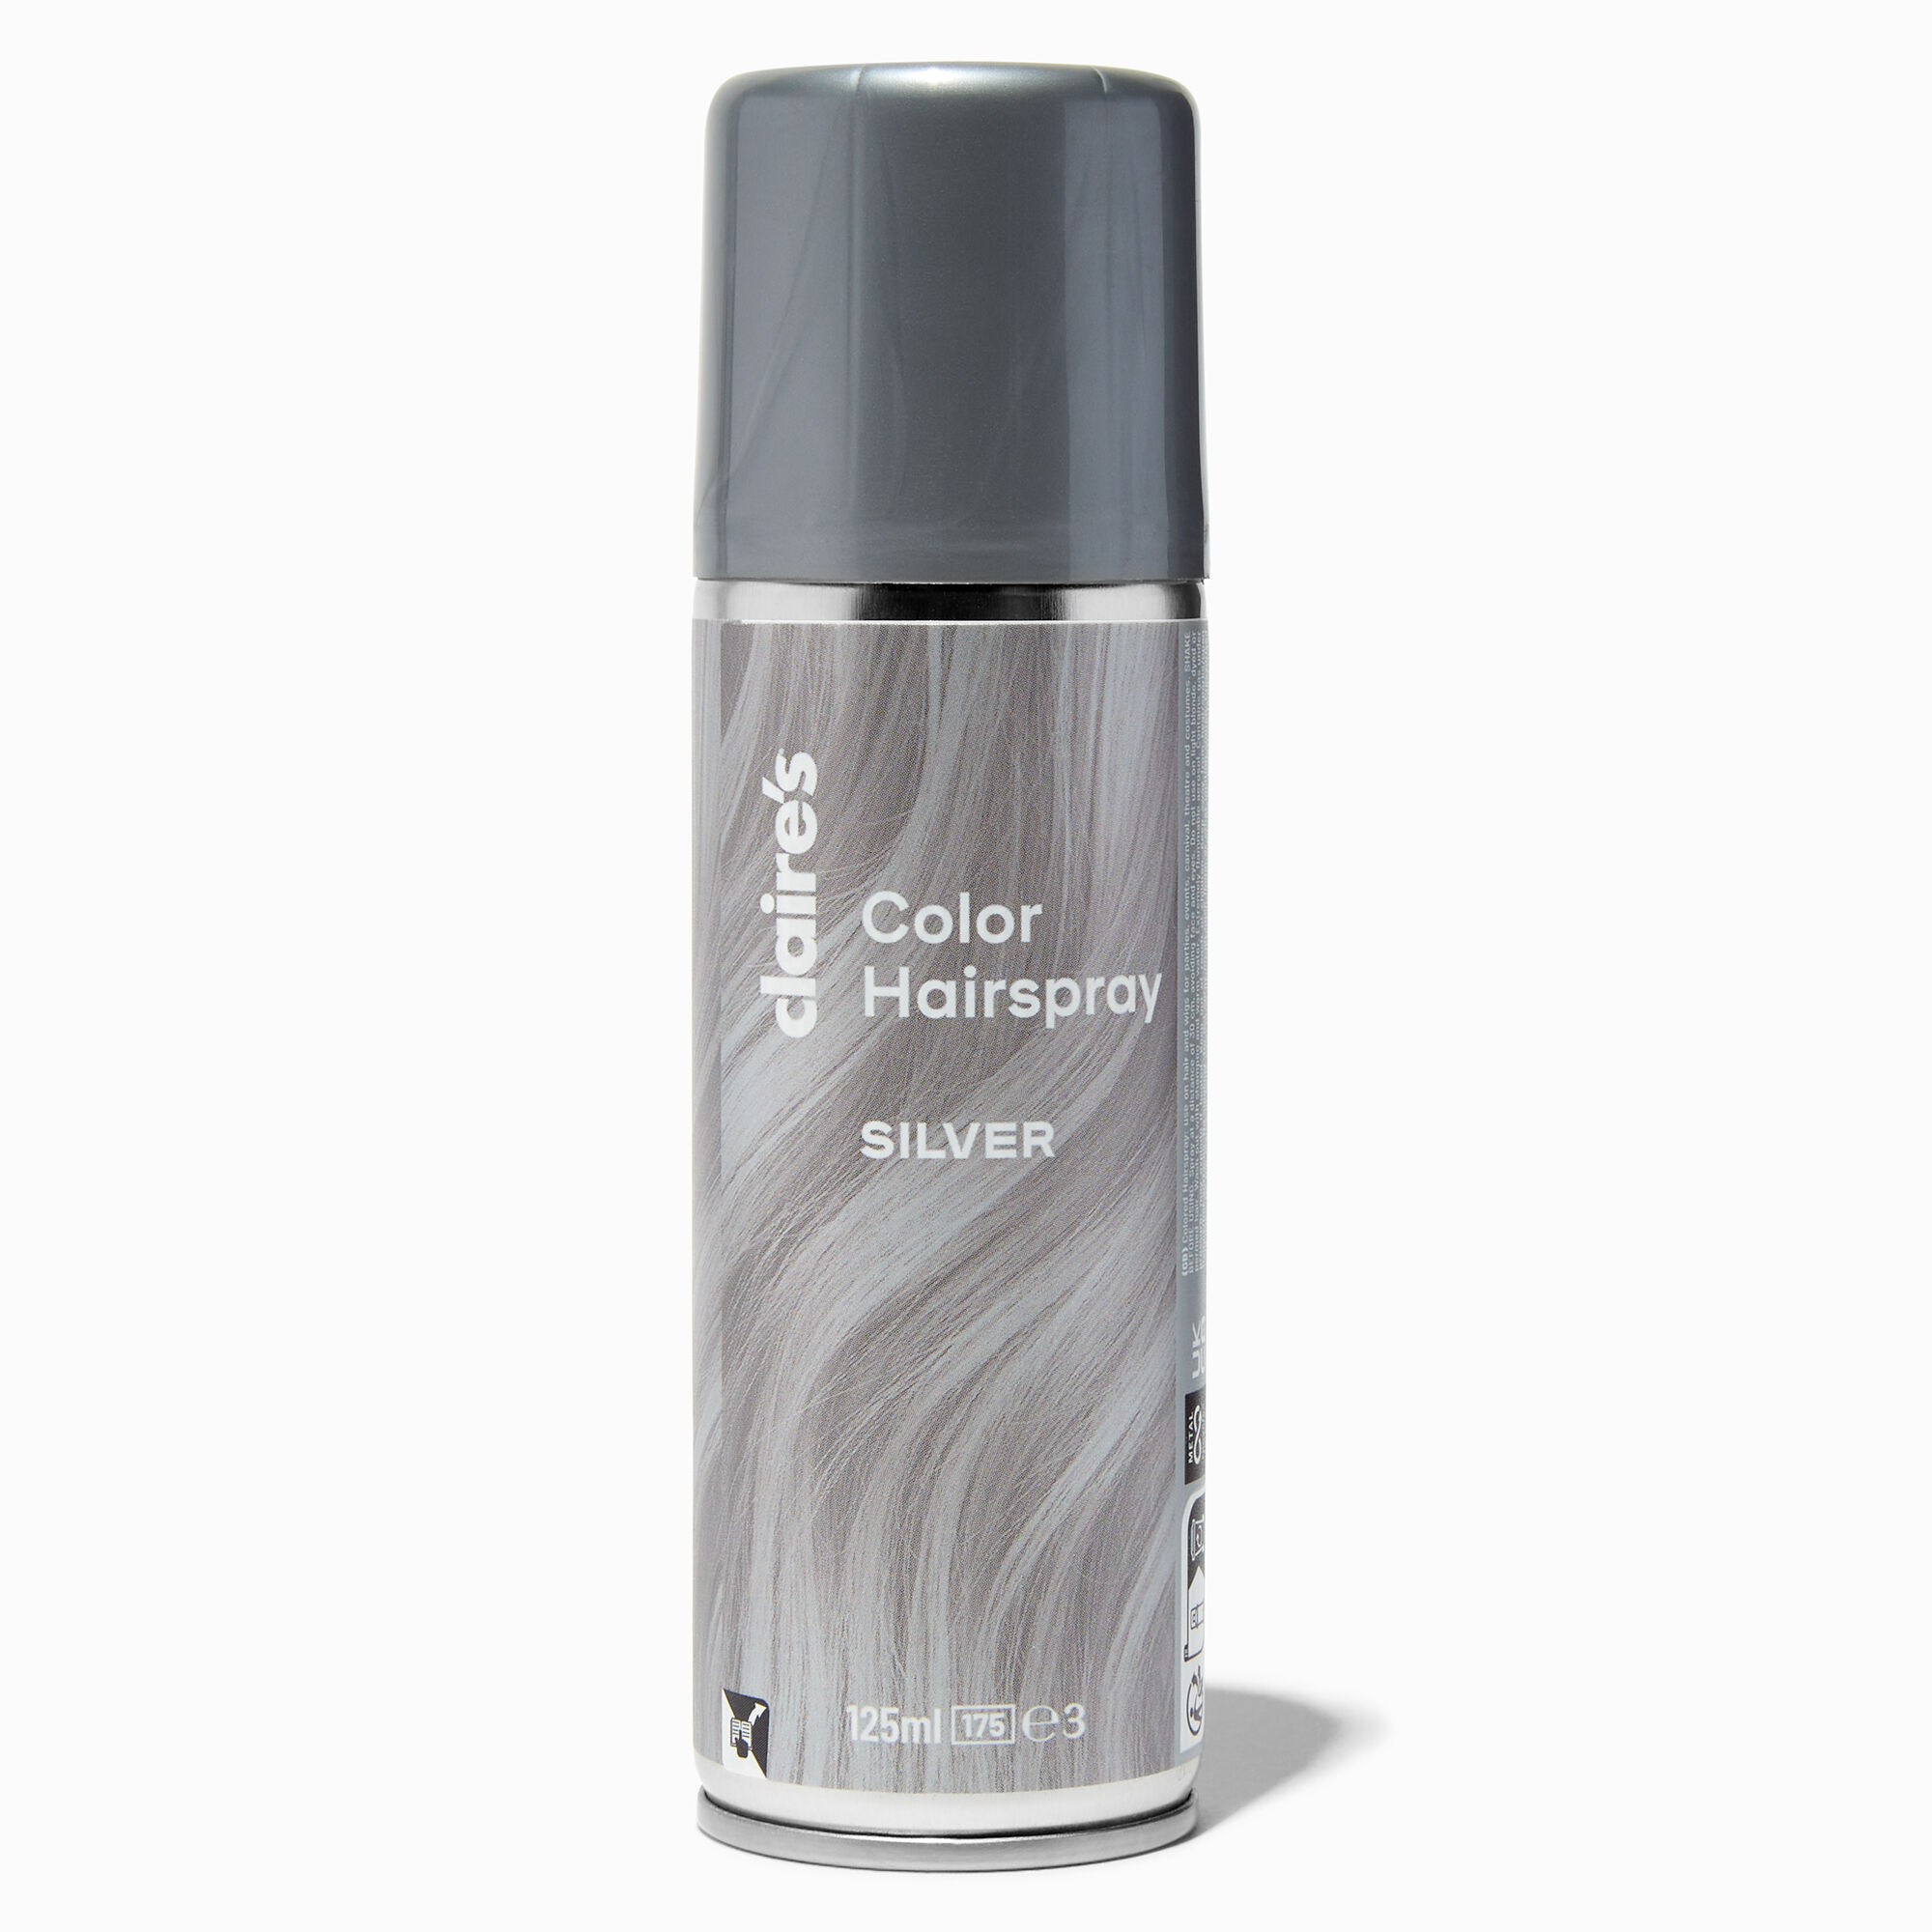 View Claires Metallic Colour Hairspray Silver information